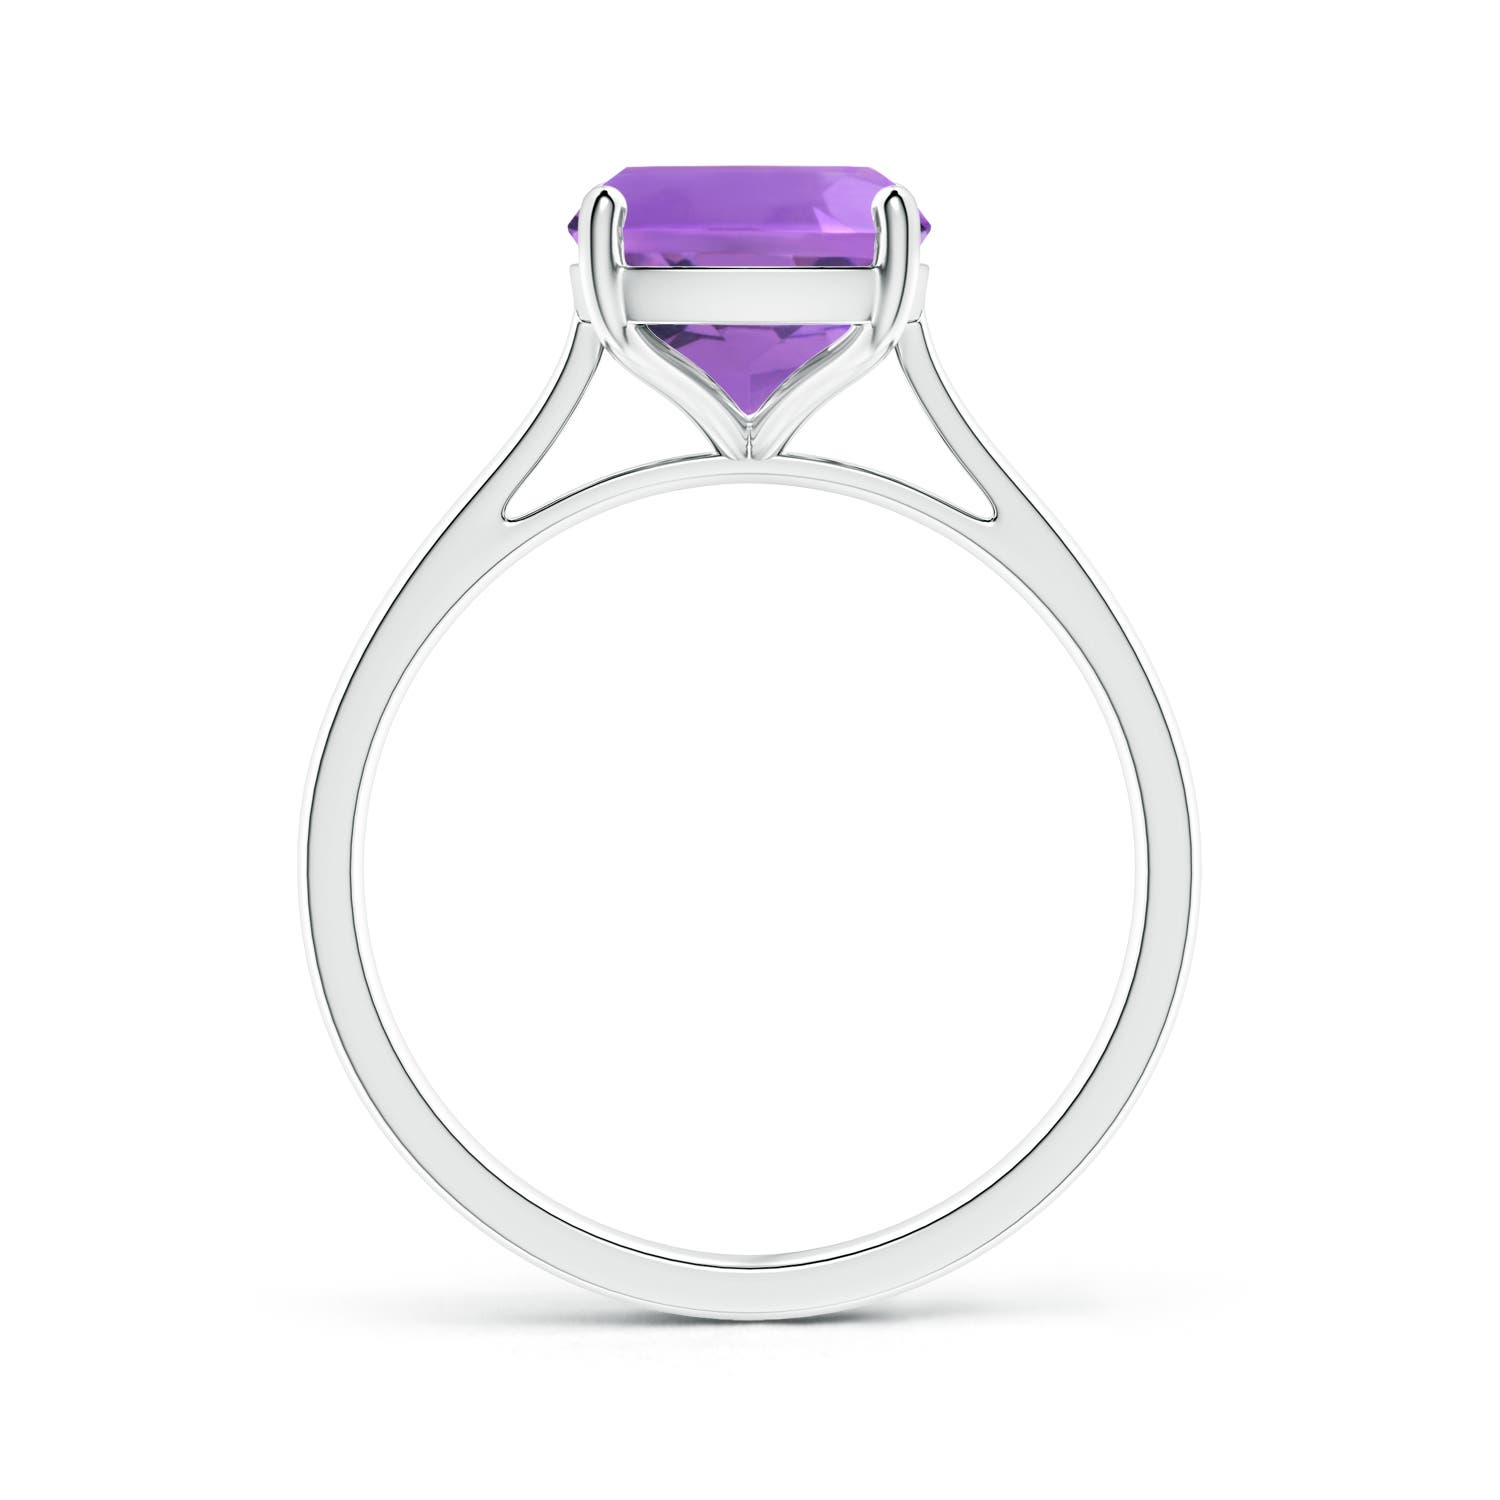 AA - Amethyst / 2.7 CT / 14 KT White Gold